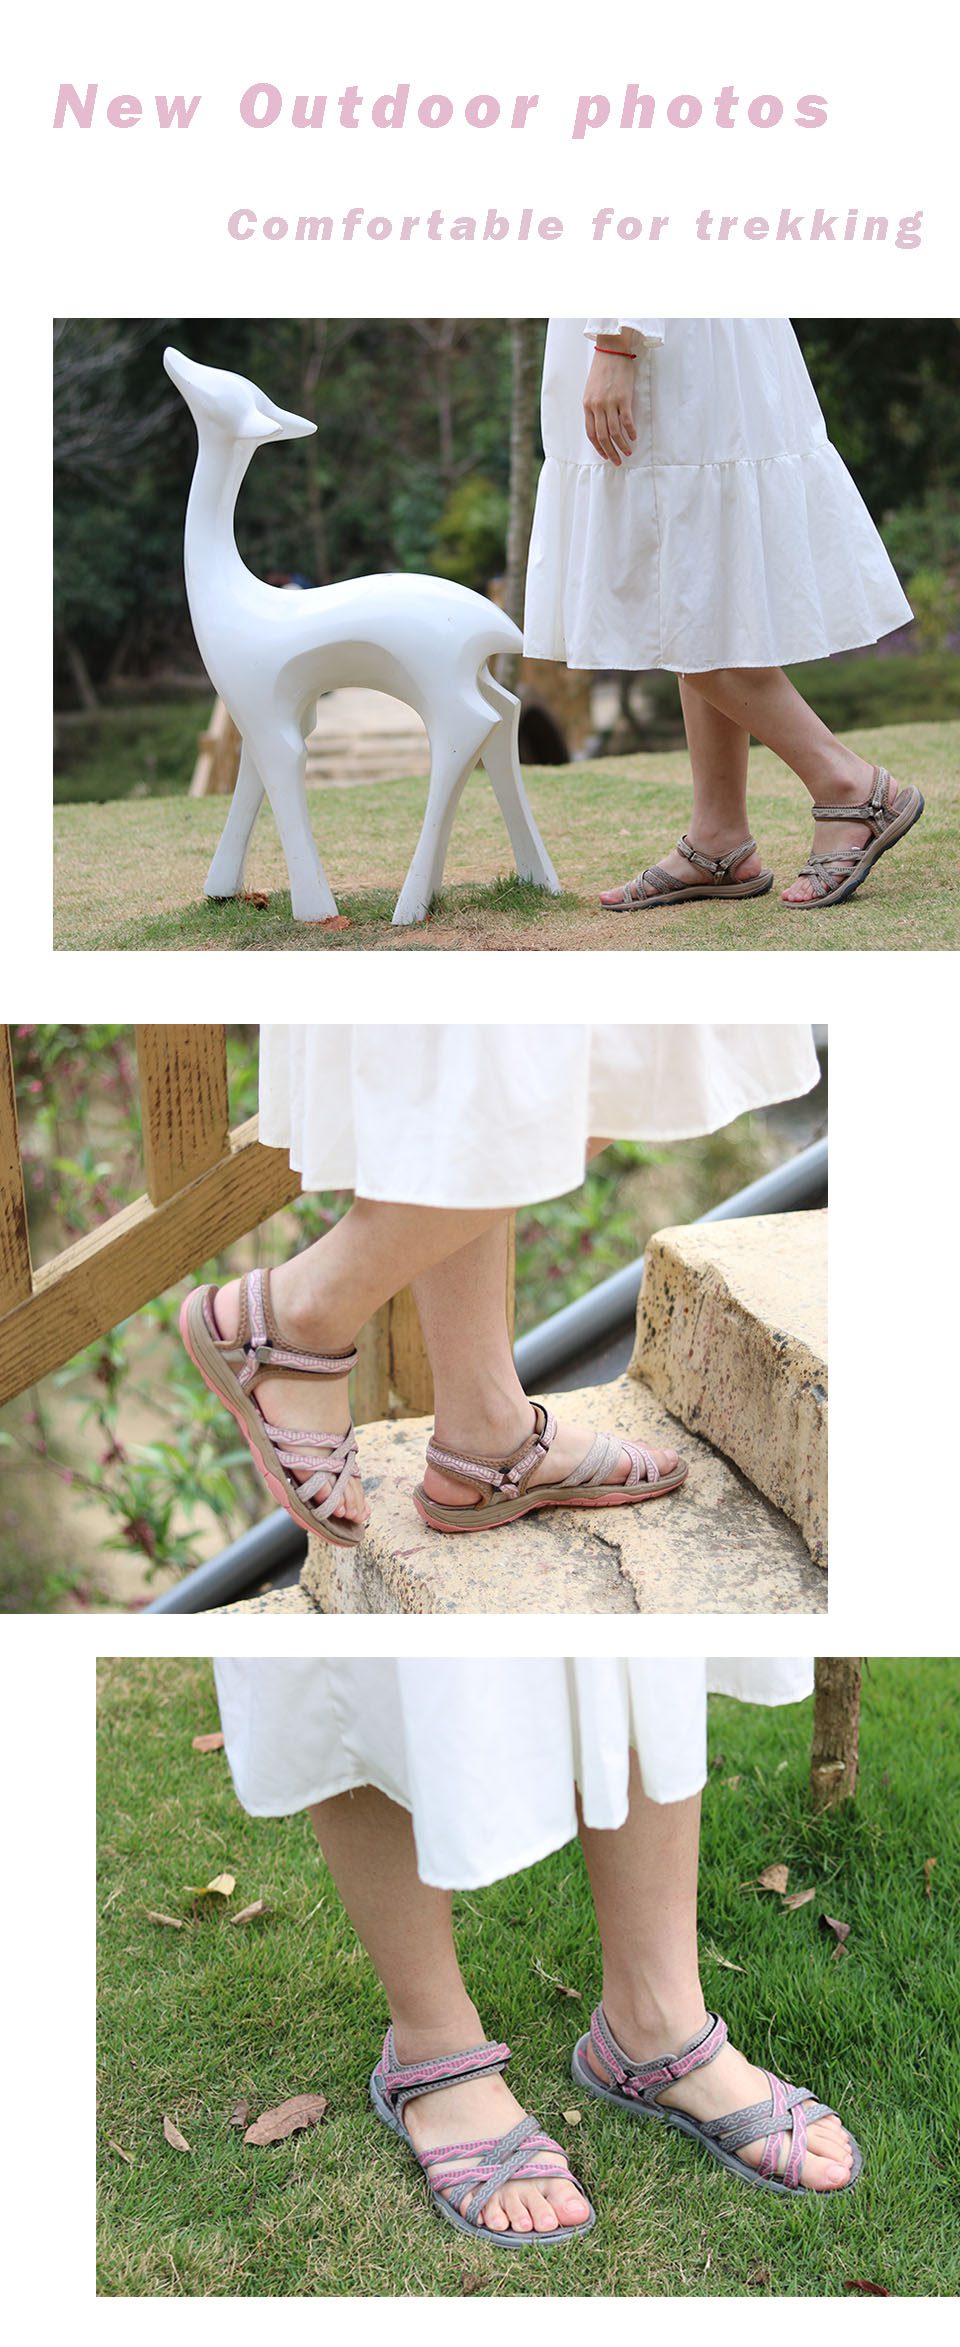 GRITION Women Summer Outdoor Casual Flat Print Ladies Comfortable Sandals